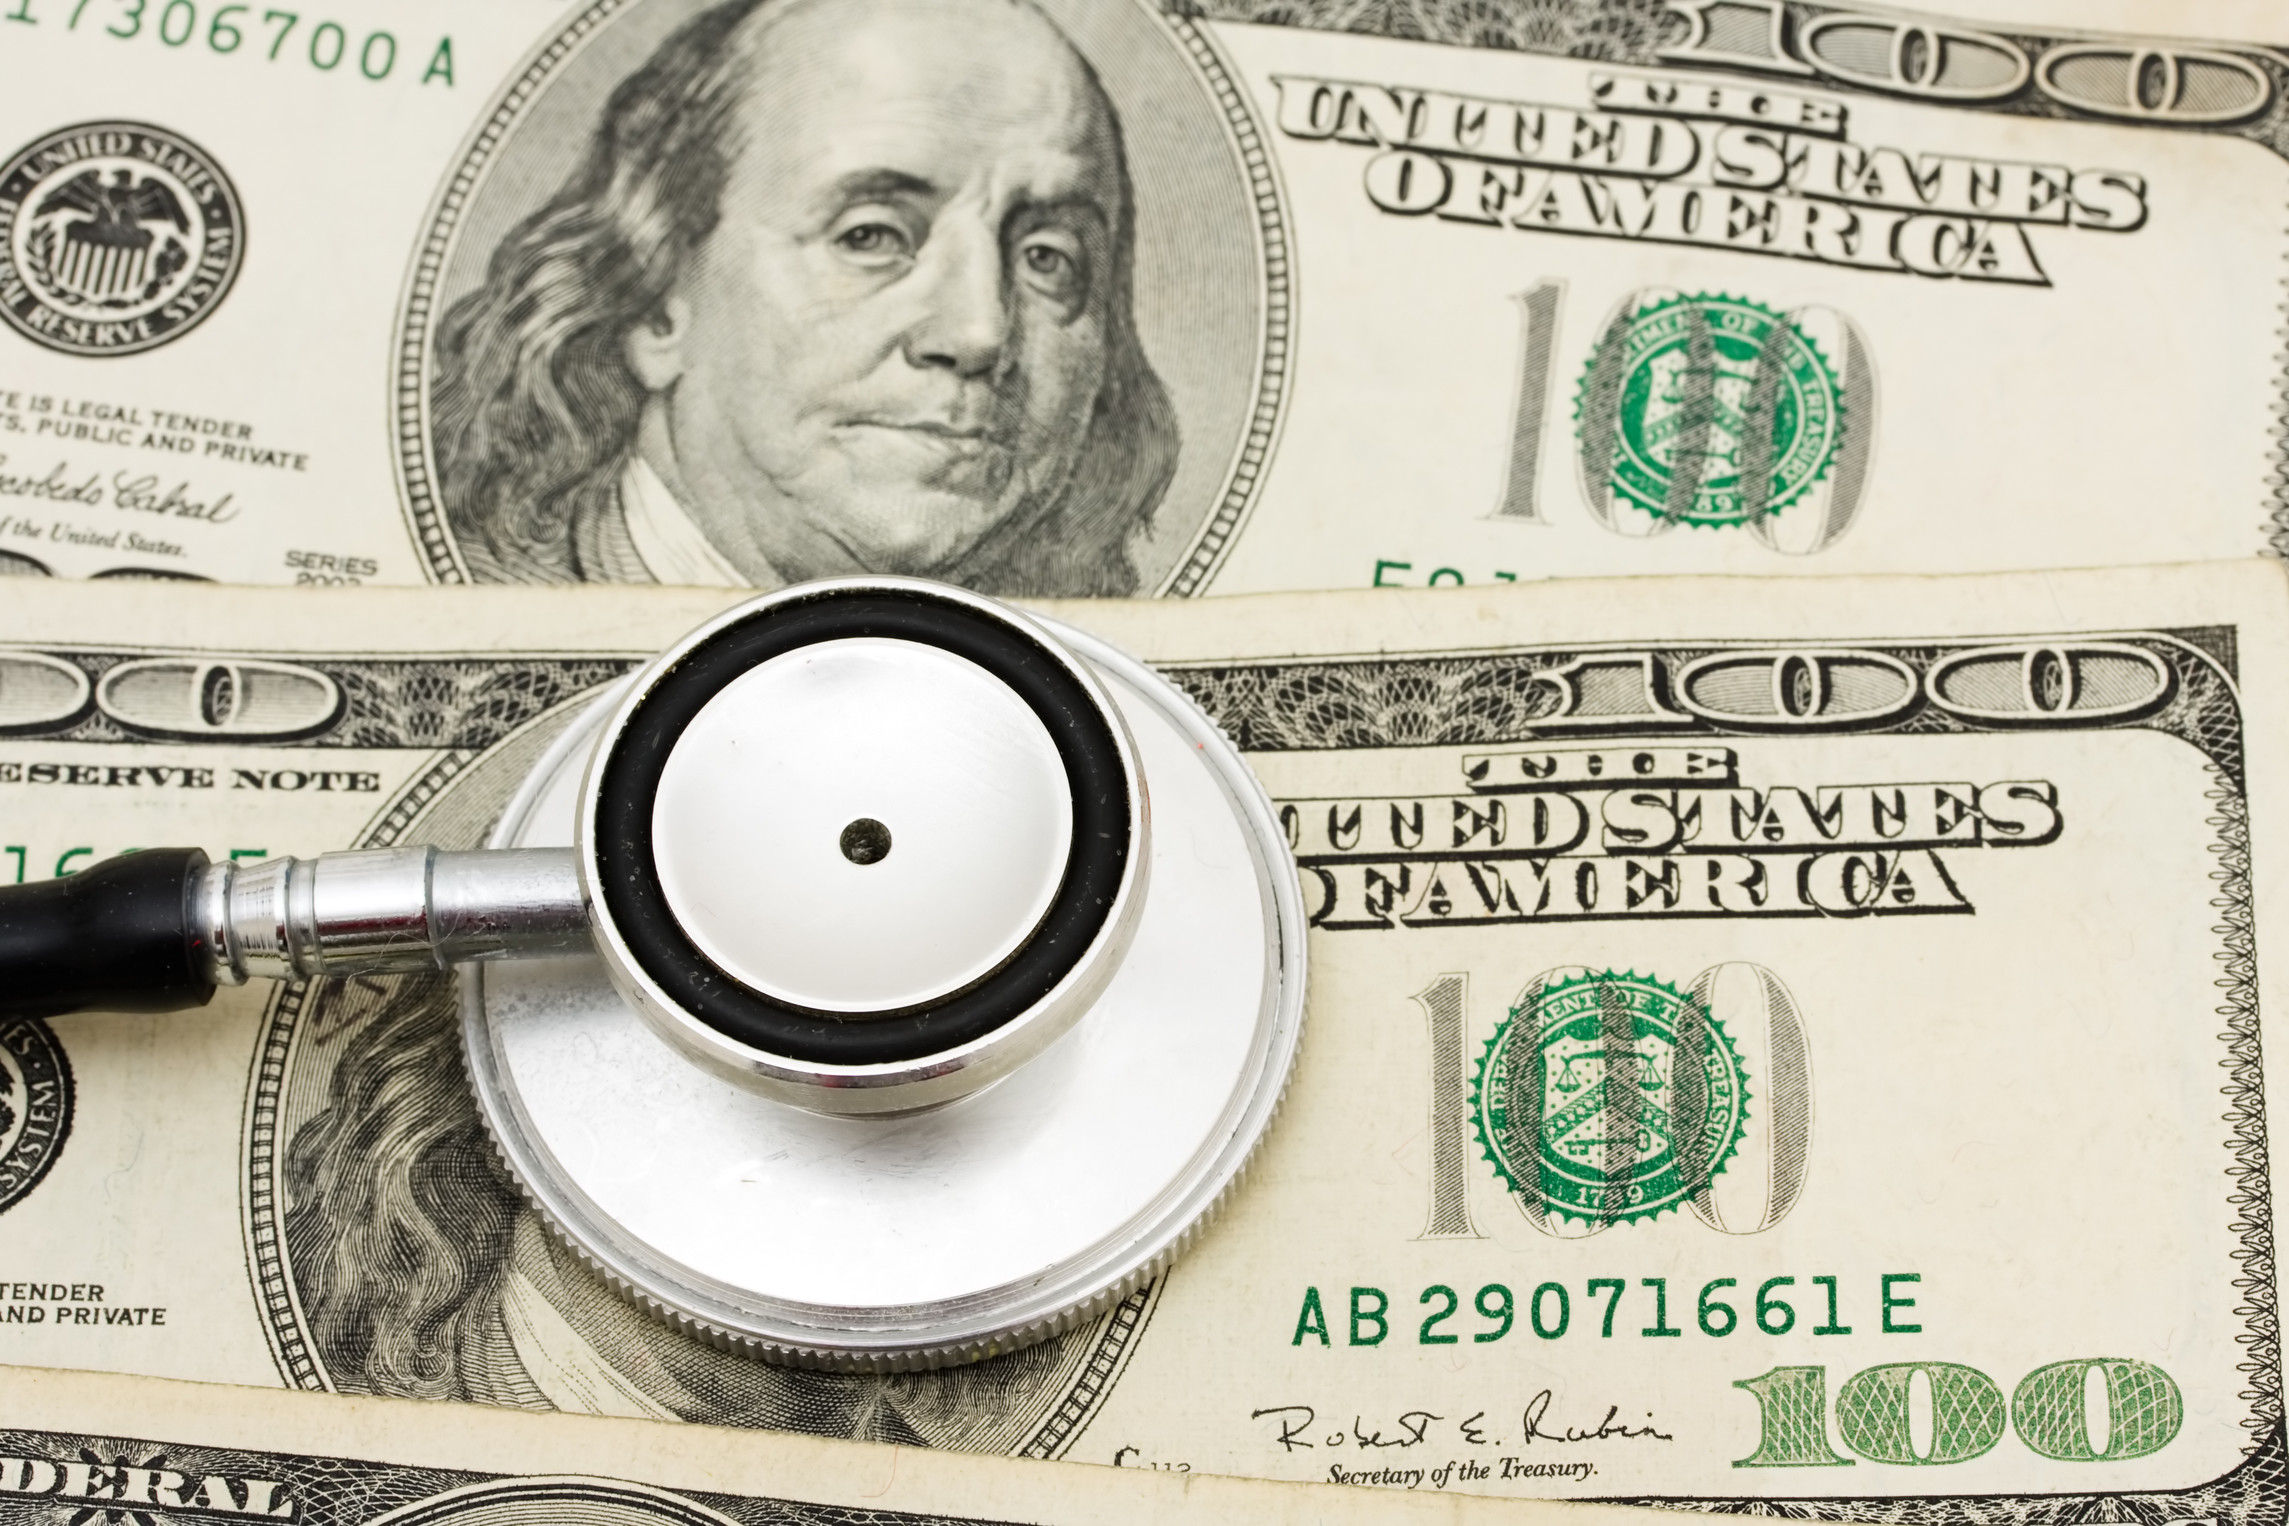 Hidden costs would undermine Public Option healthcare proposal, according to study